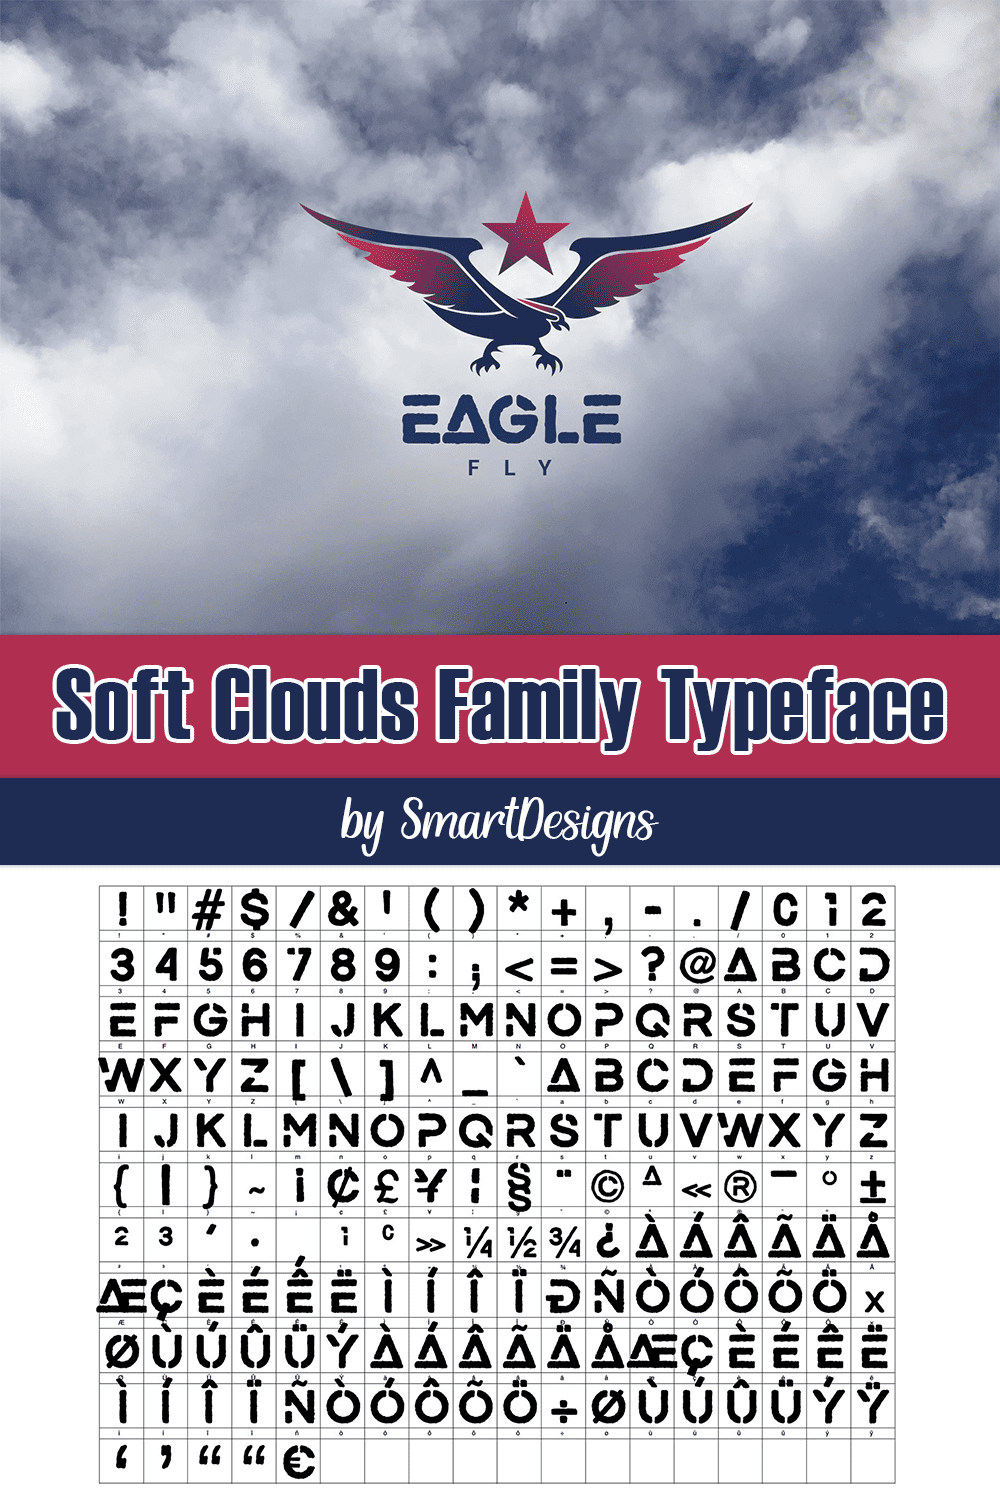 Soft clouds family typeface of pinterest.